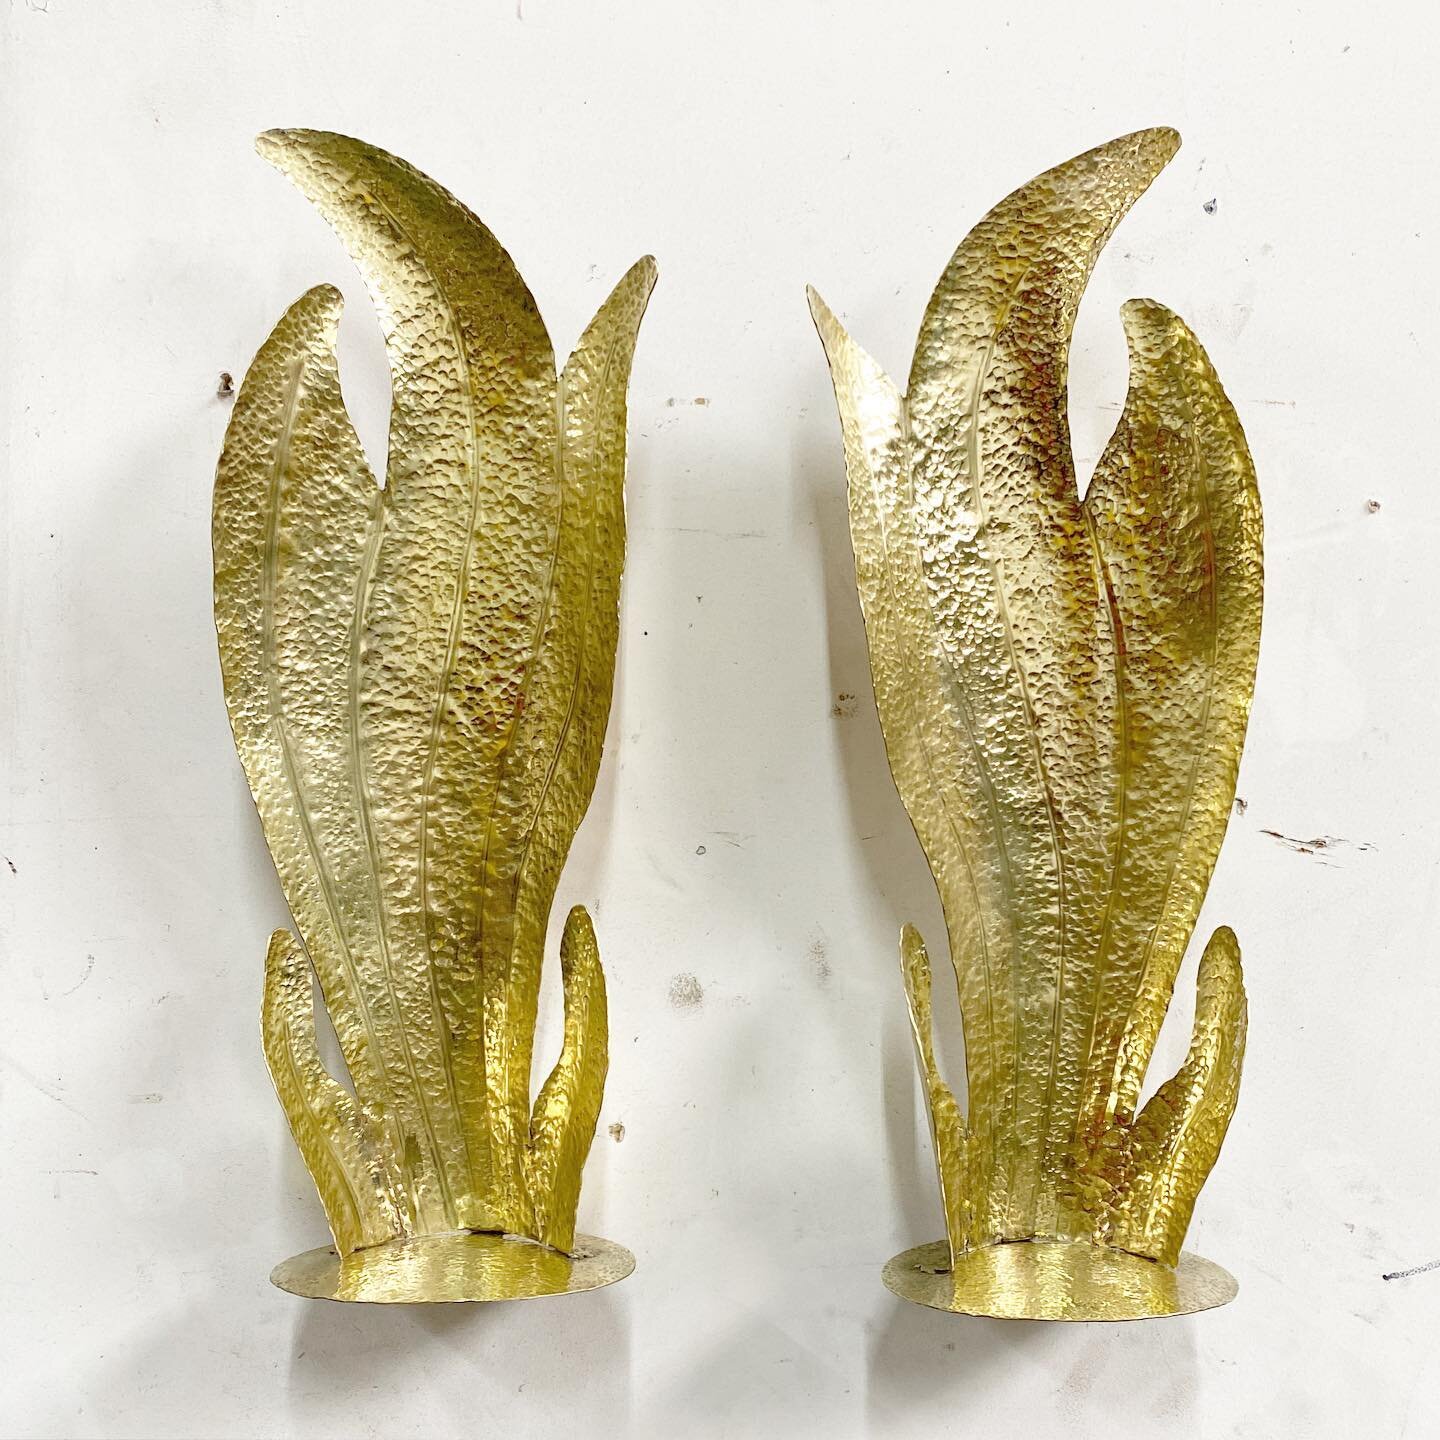 These hand hammered unlacquered brass sconces really came great. I believe they will flank a doorway. Always the option of a candle to illuminate the hammer marks. ......................................................................................